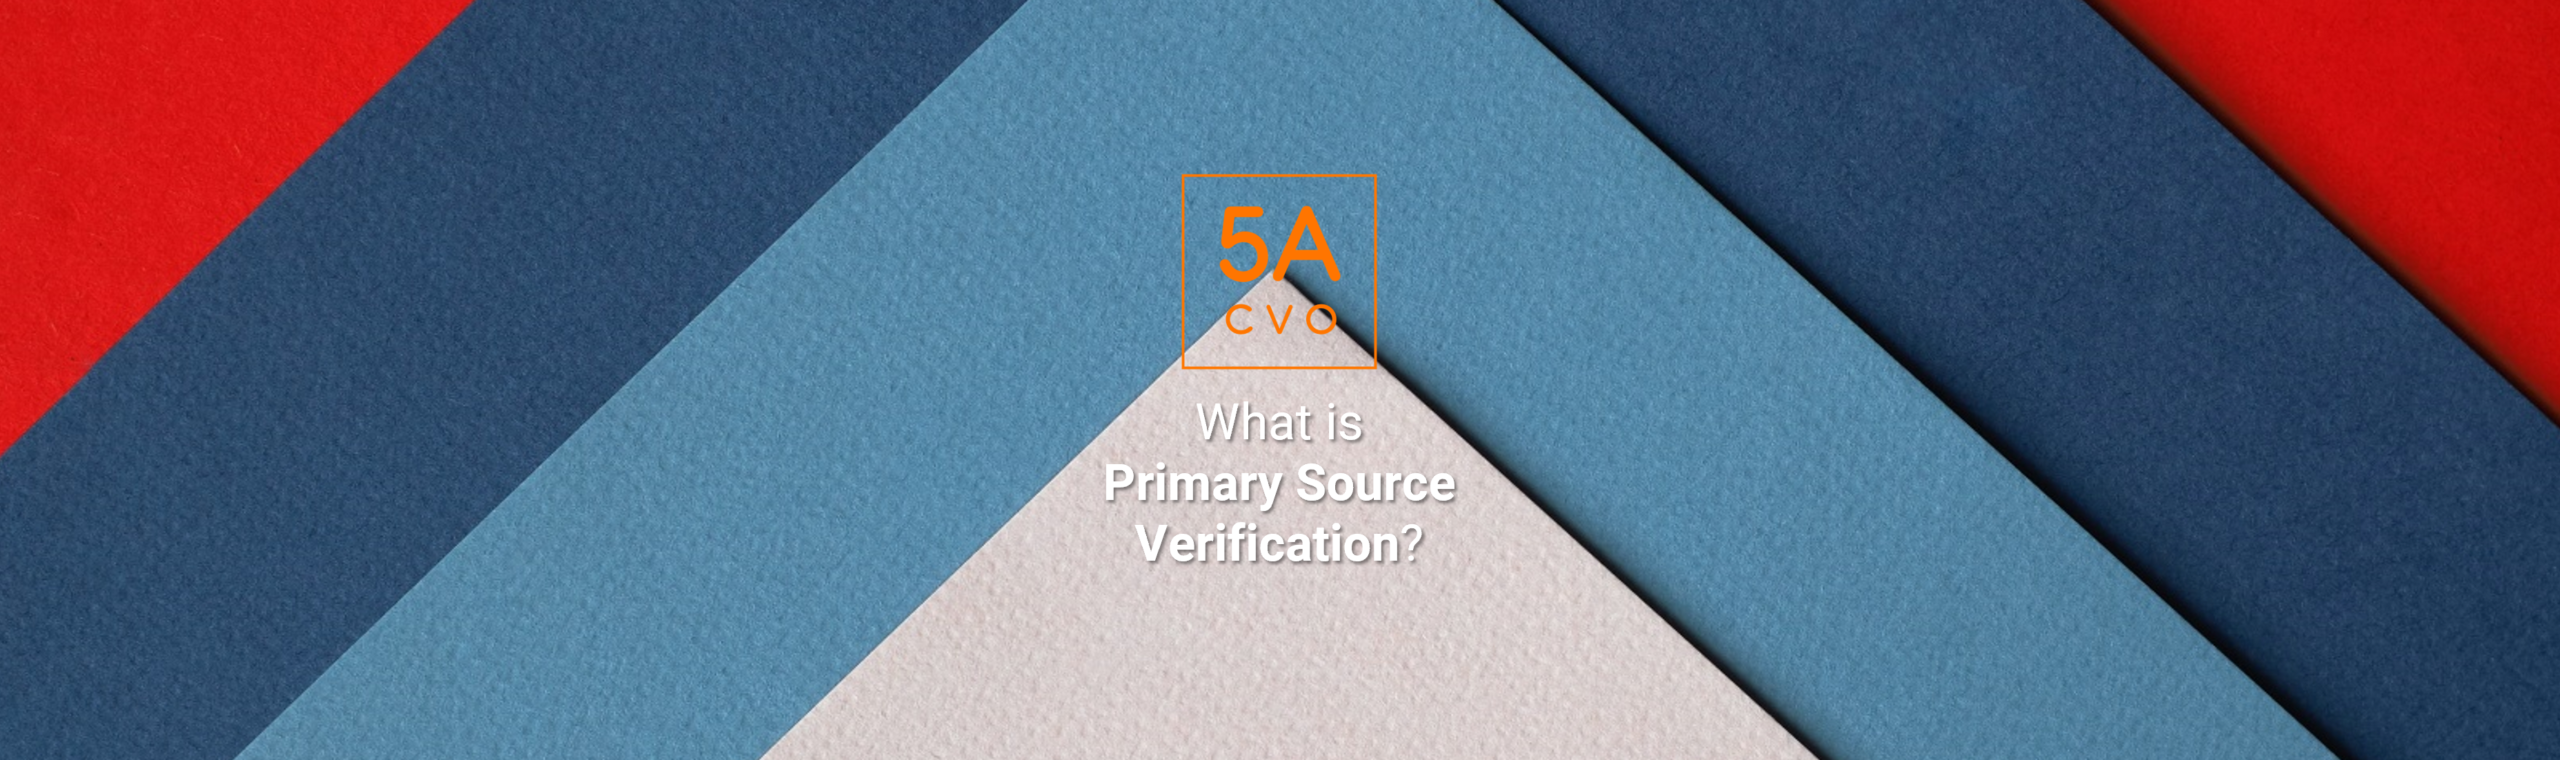 What Is Primary Source Verification - PSV